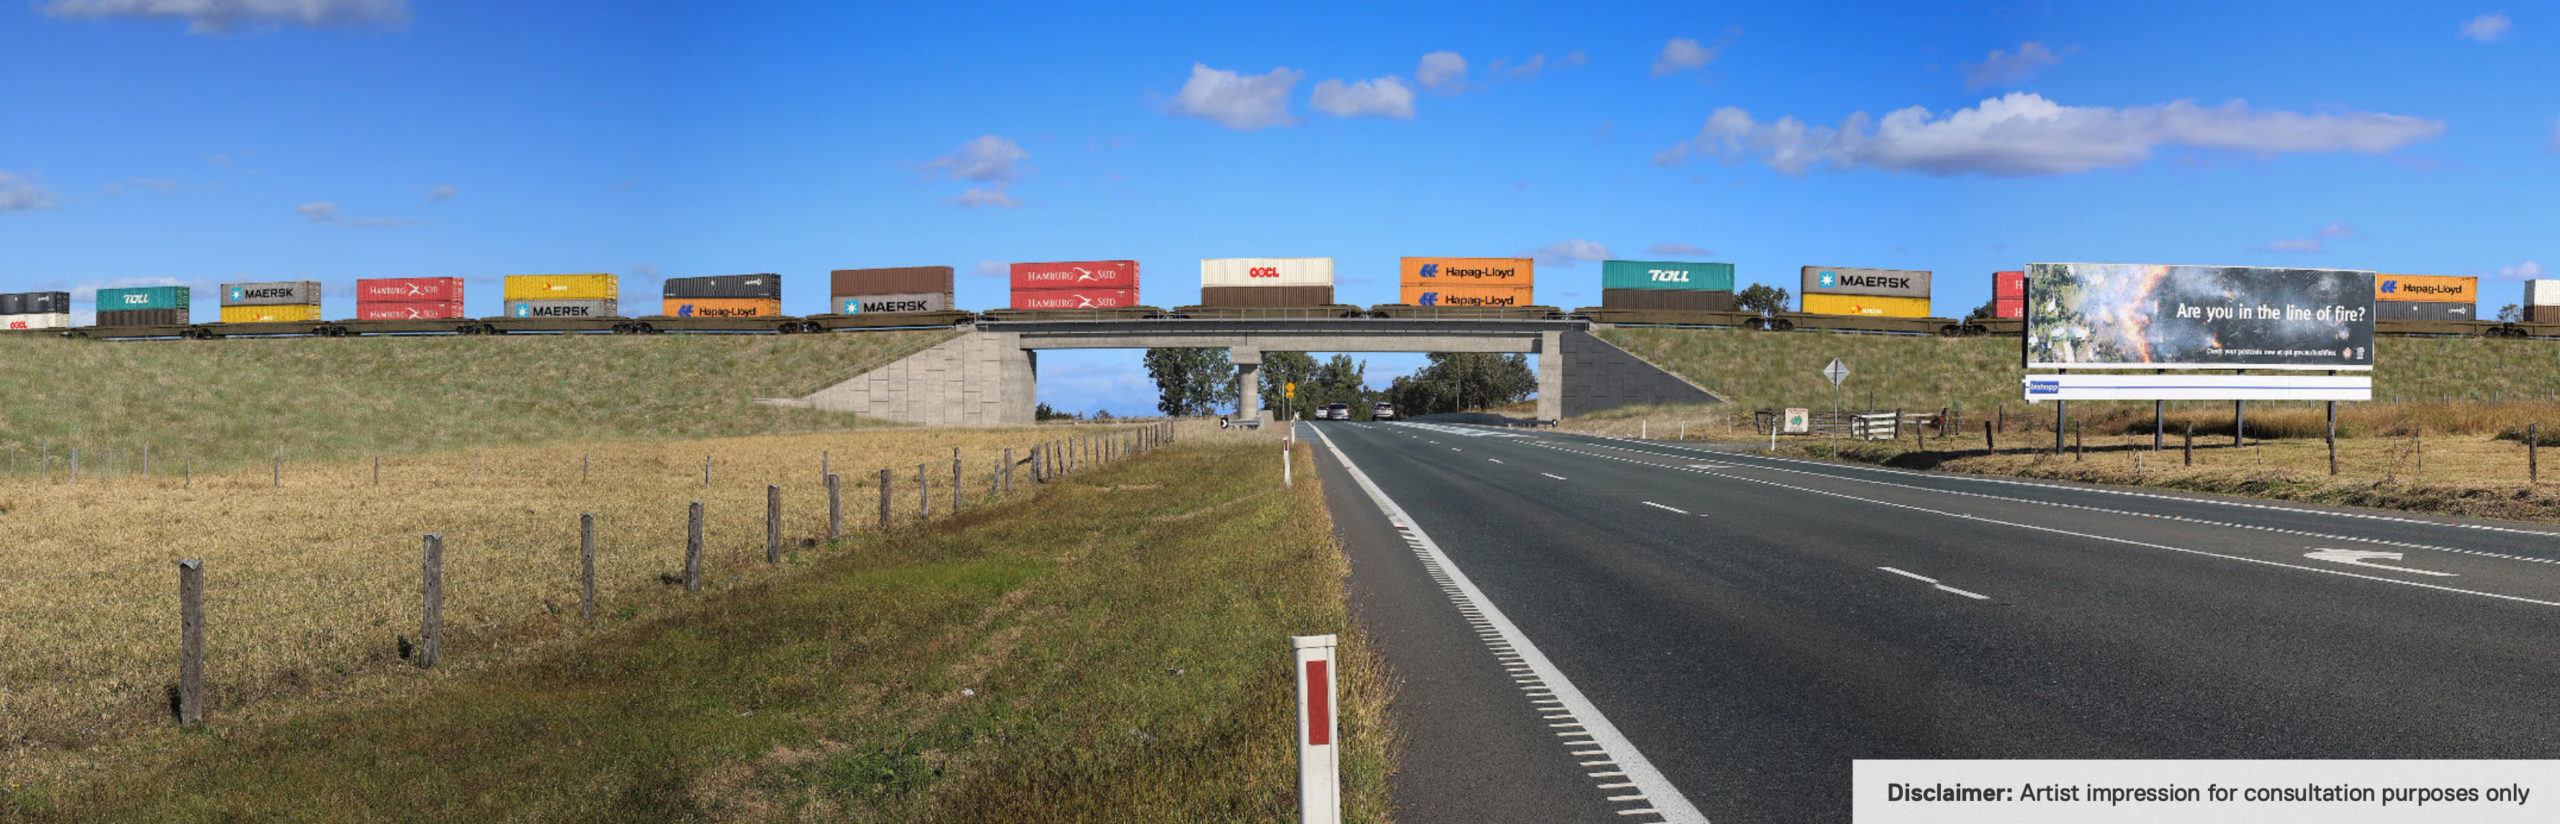 Visualisation of Cunningham Highway Overpass showing double-stacked trains travelling on a bridge over the highway